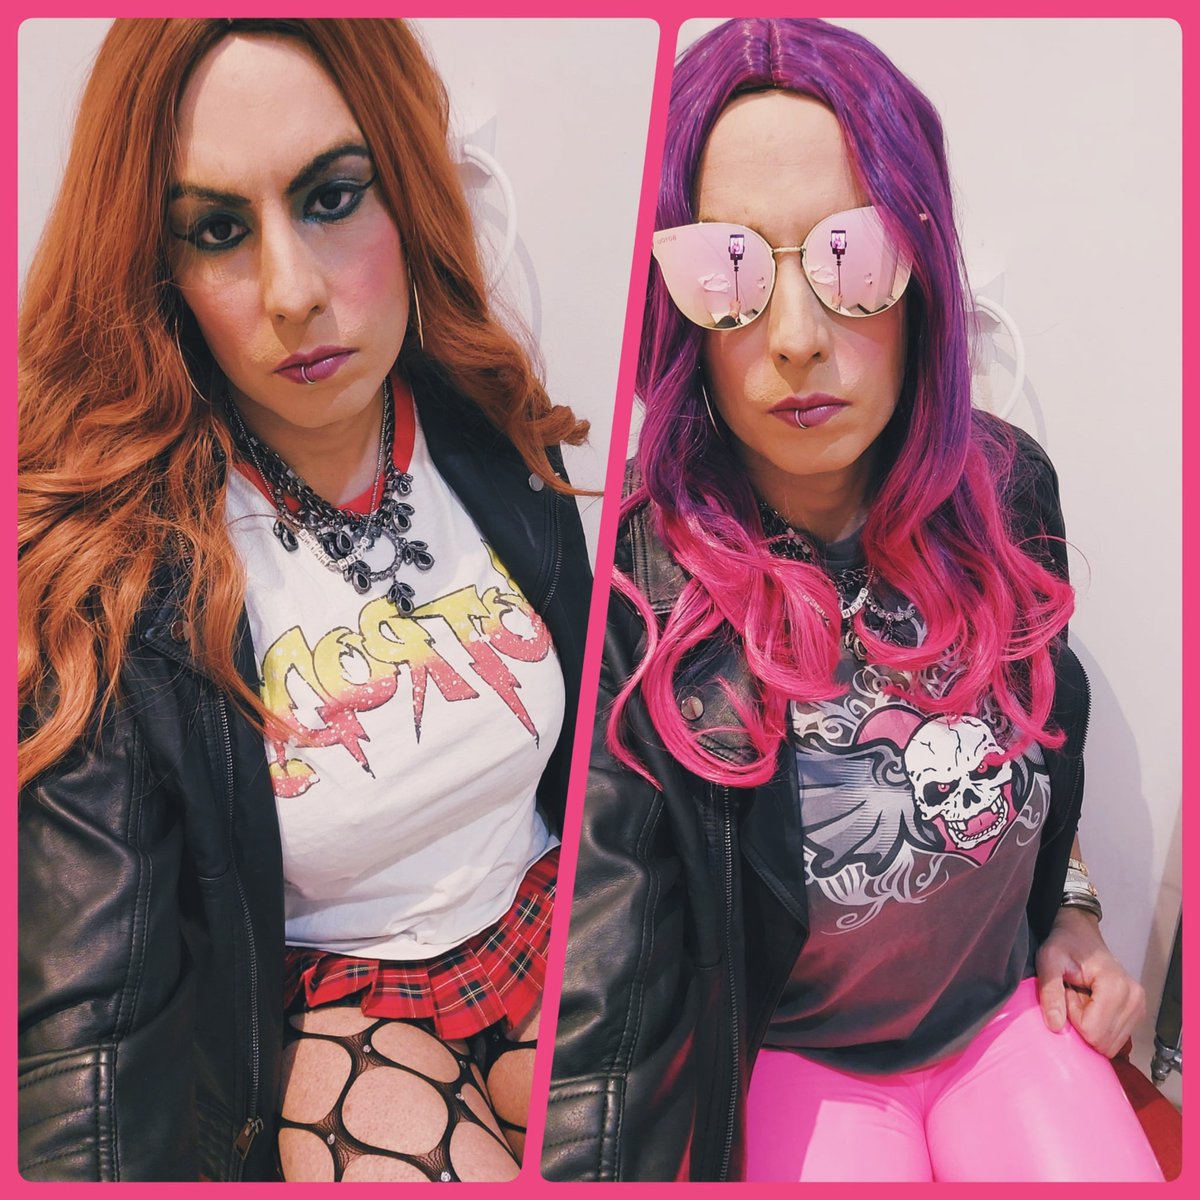 Day 2....Roddy and Bret. My own homage to their classic match at Wrestlemania 8, which remains one of my all time favourites #m2f #crossdresser #transisbeautiful #femboi #girlslikeus